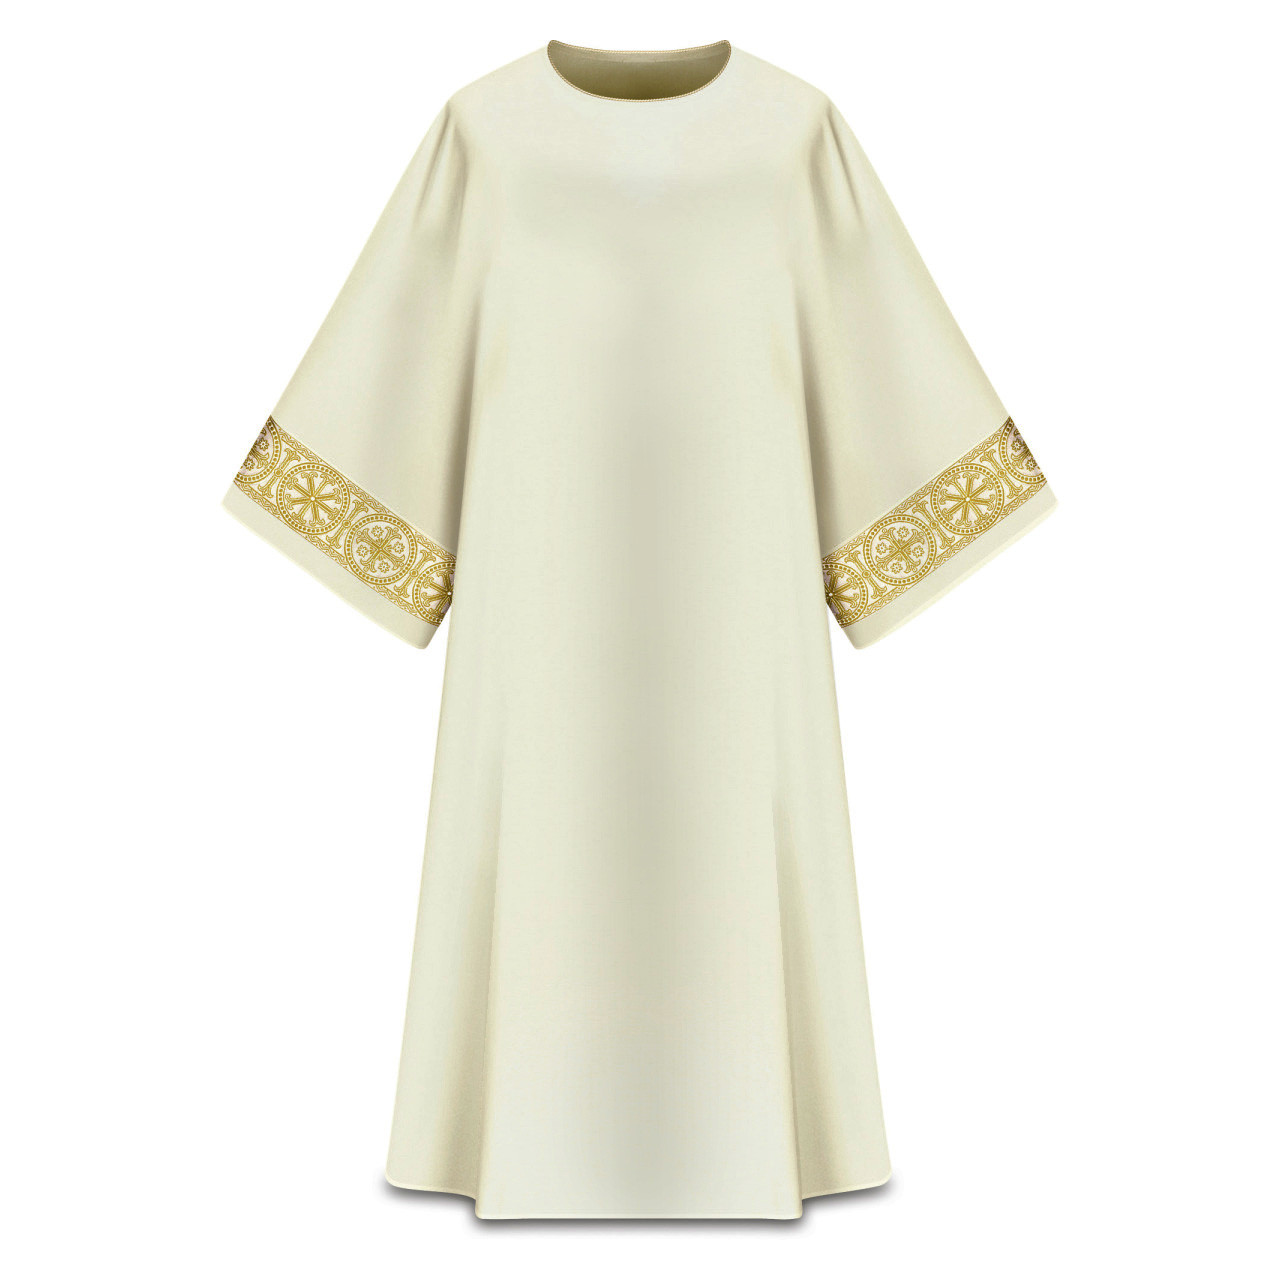 707011 Assisi Dalmatic Series with Banding